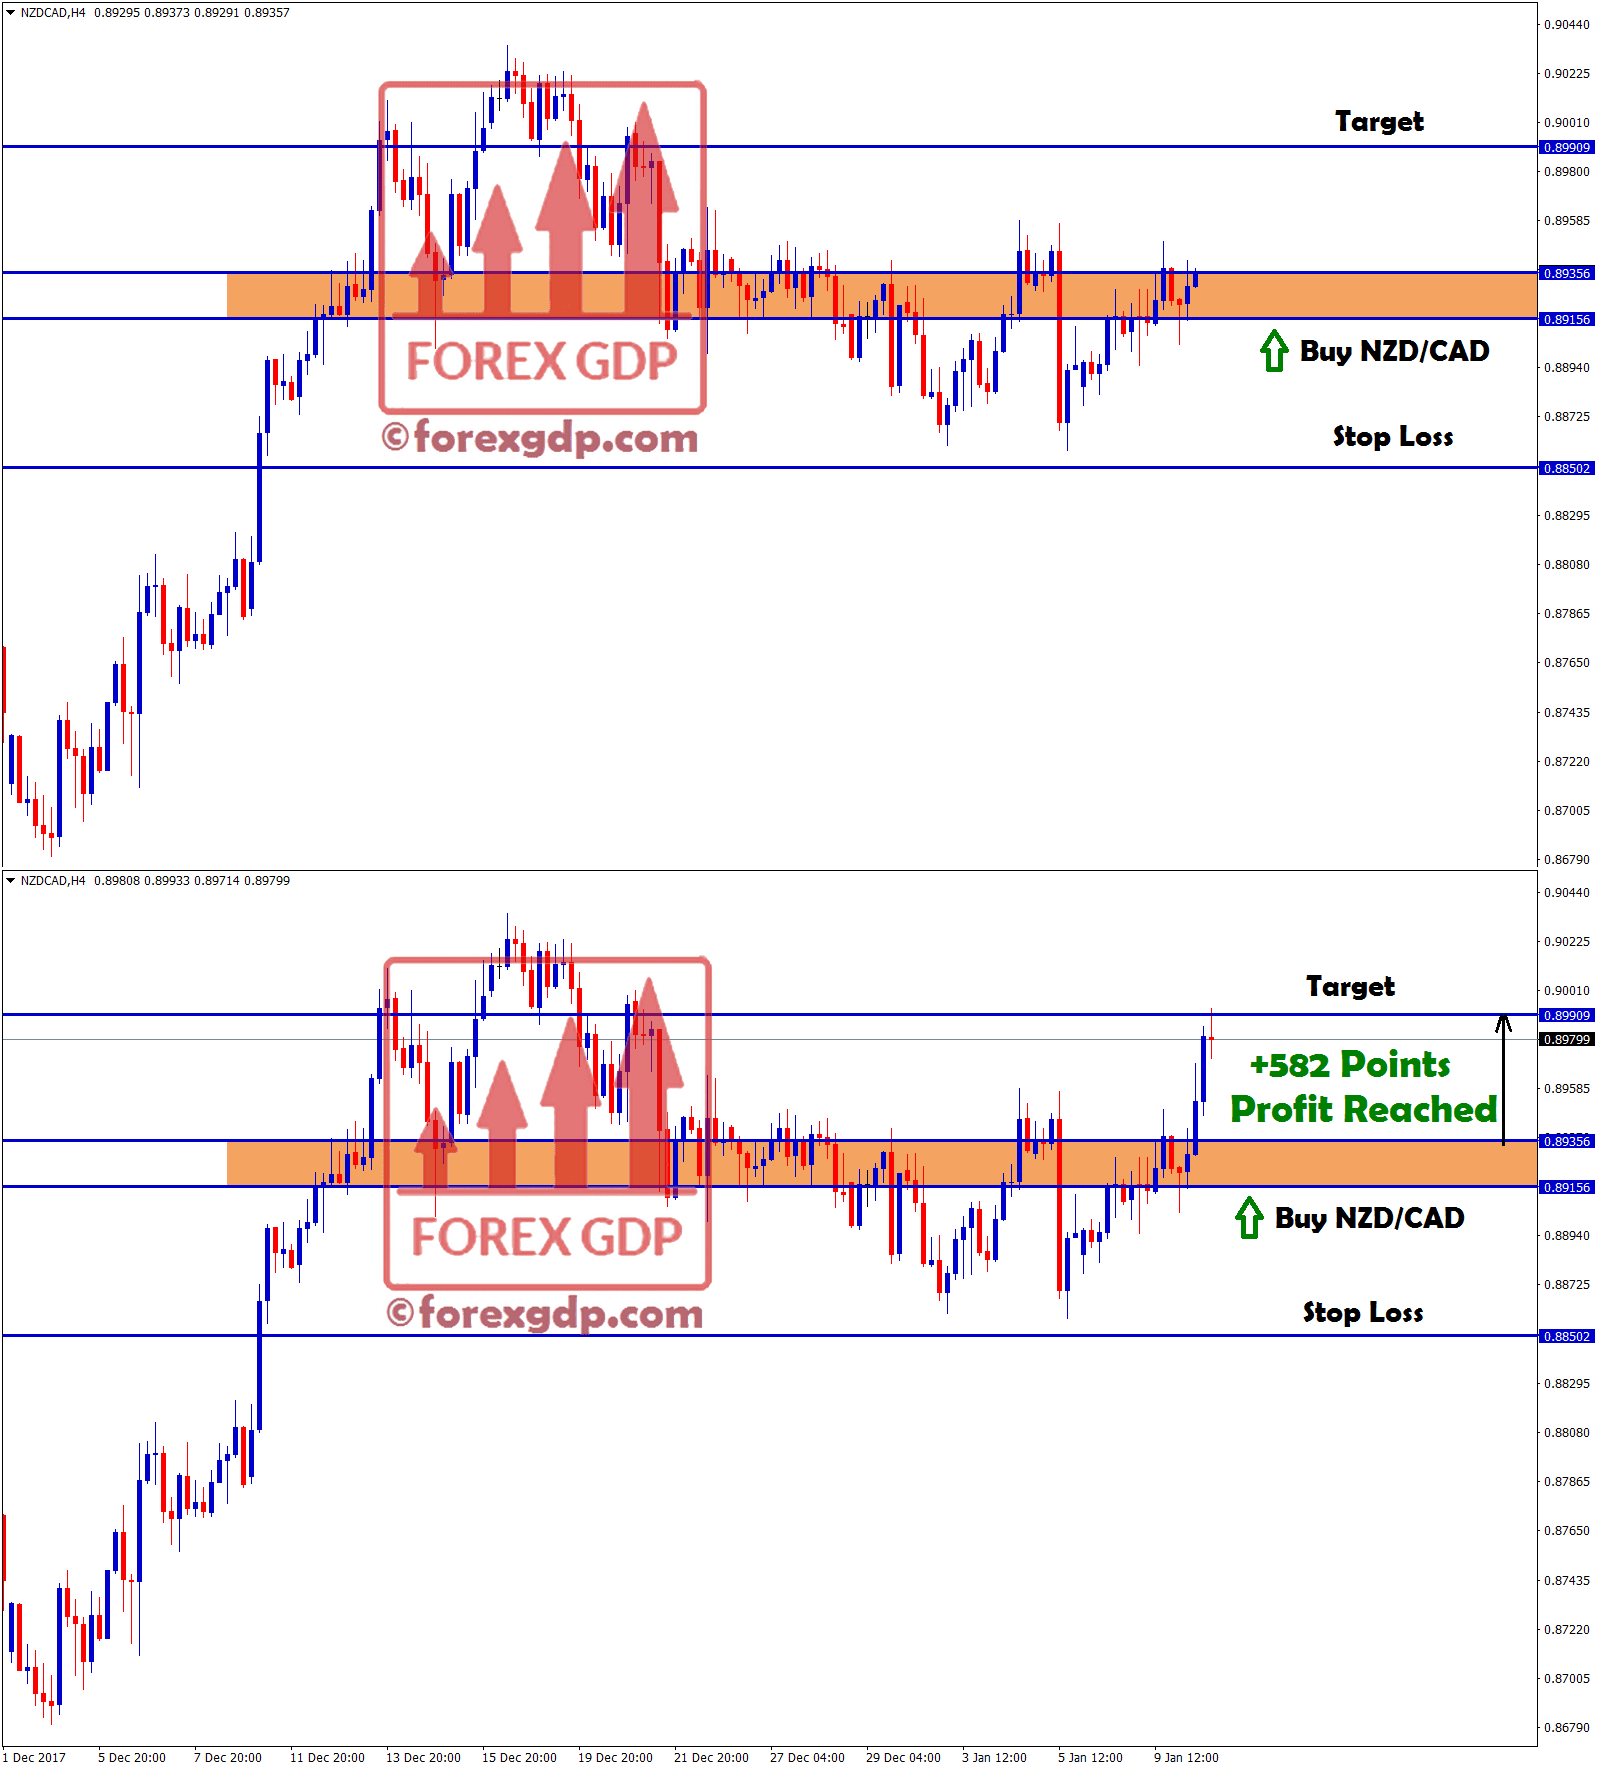 nzd cad hits target with +582 points profit